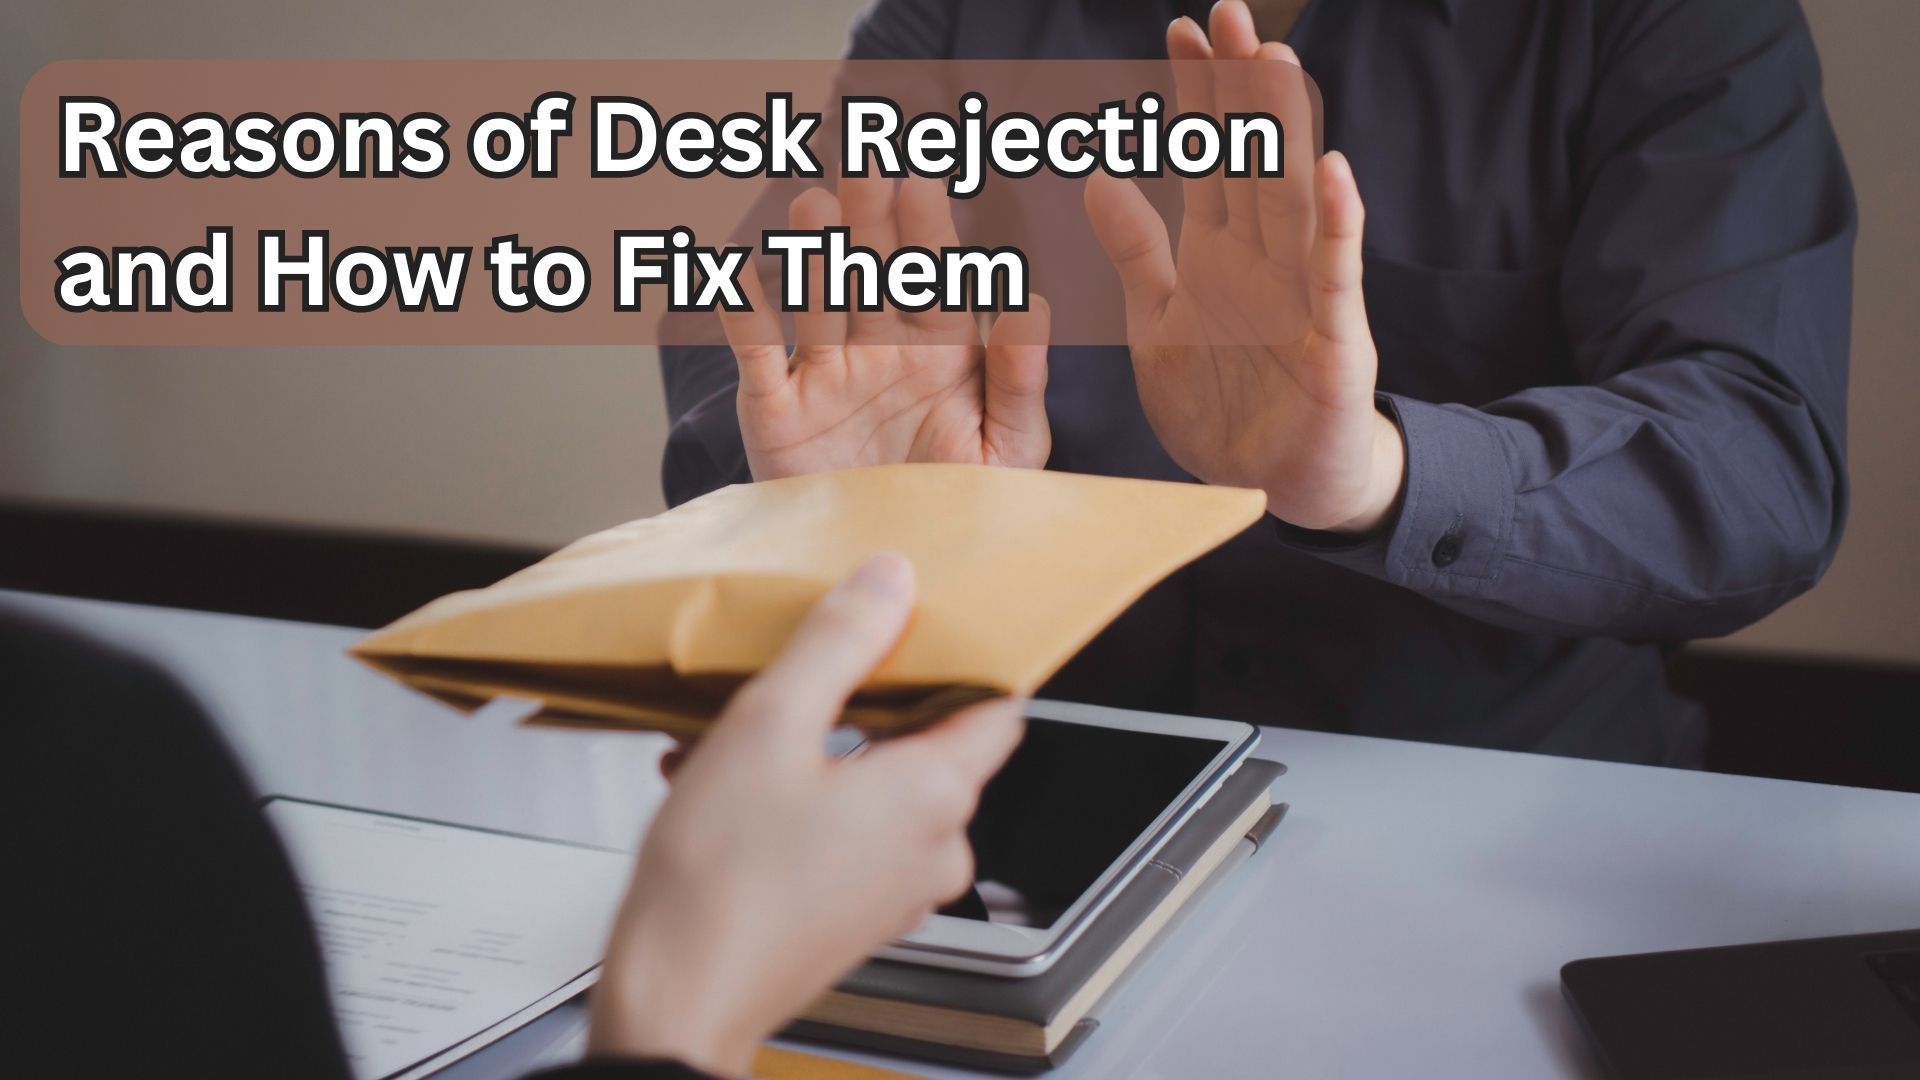 Reasons of Desk Rejection and How to Fix Them